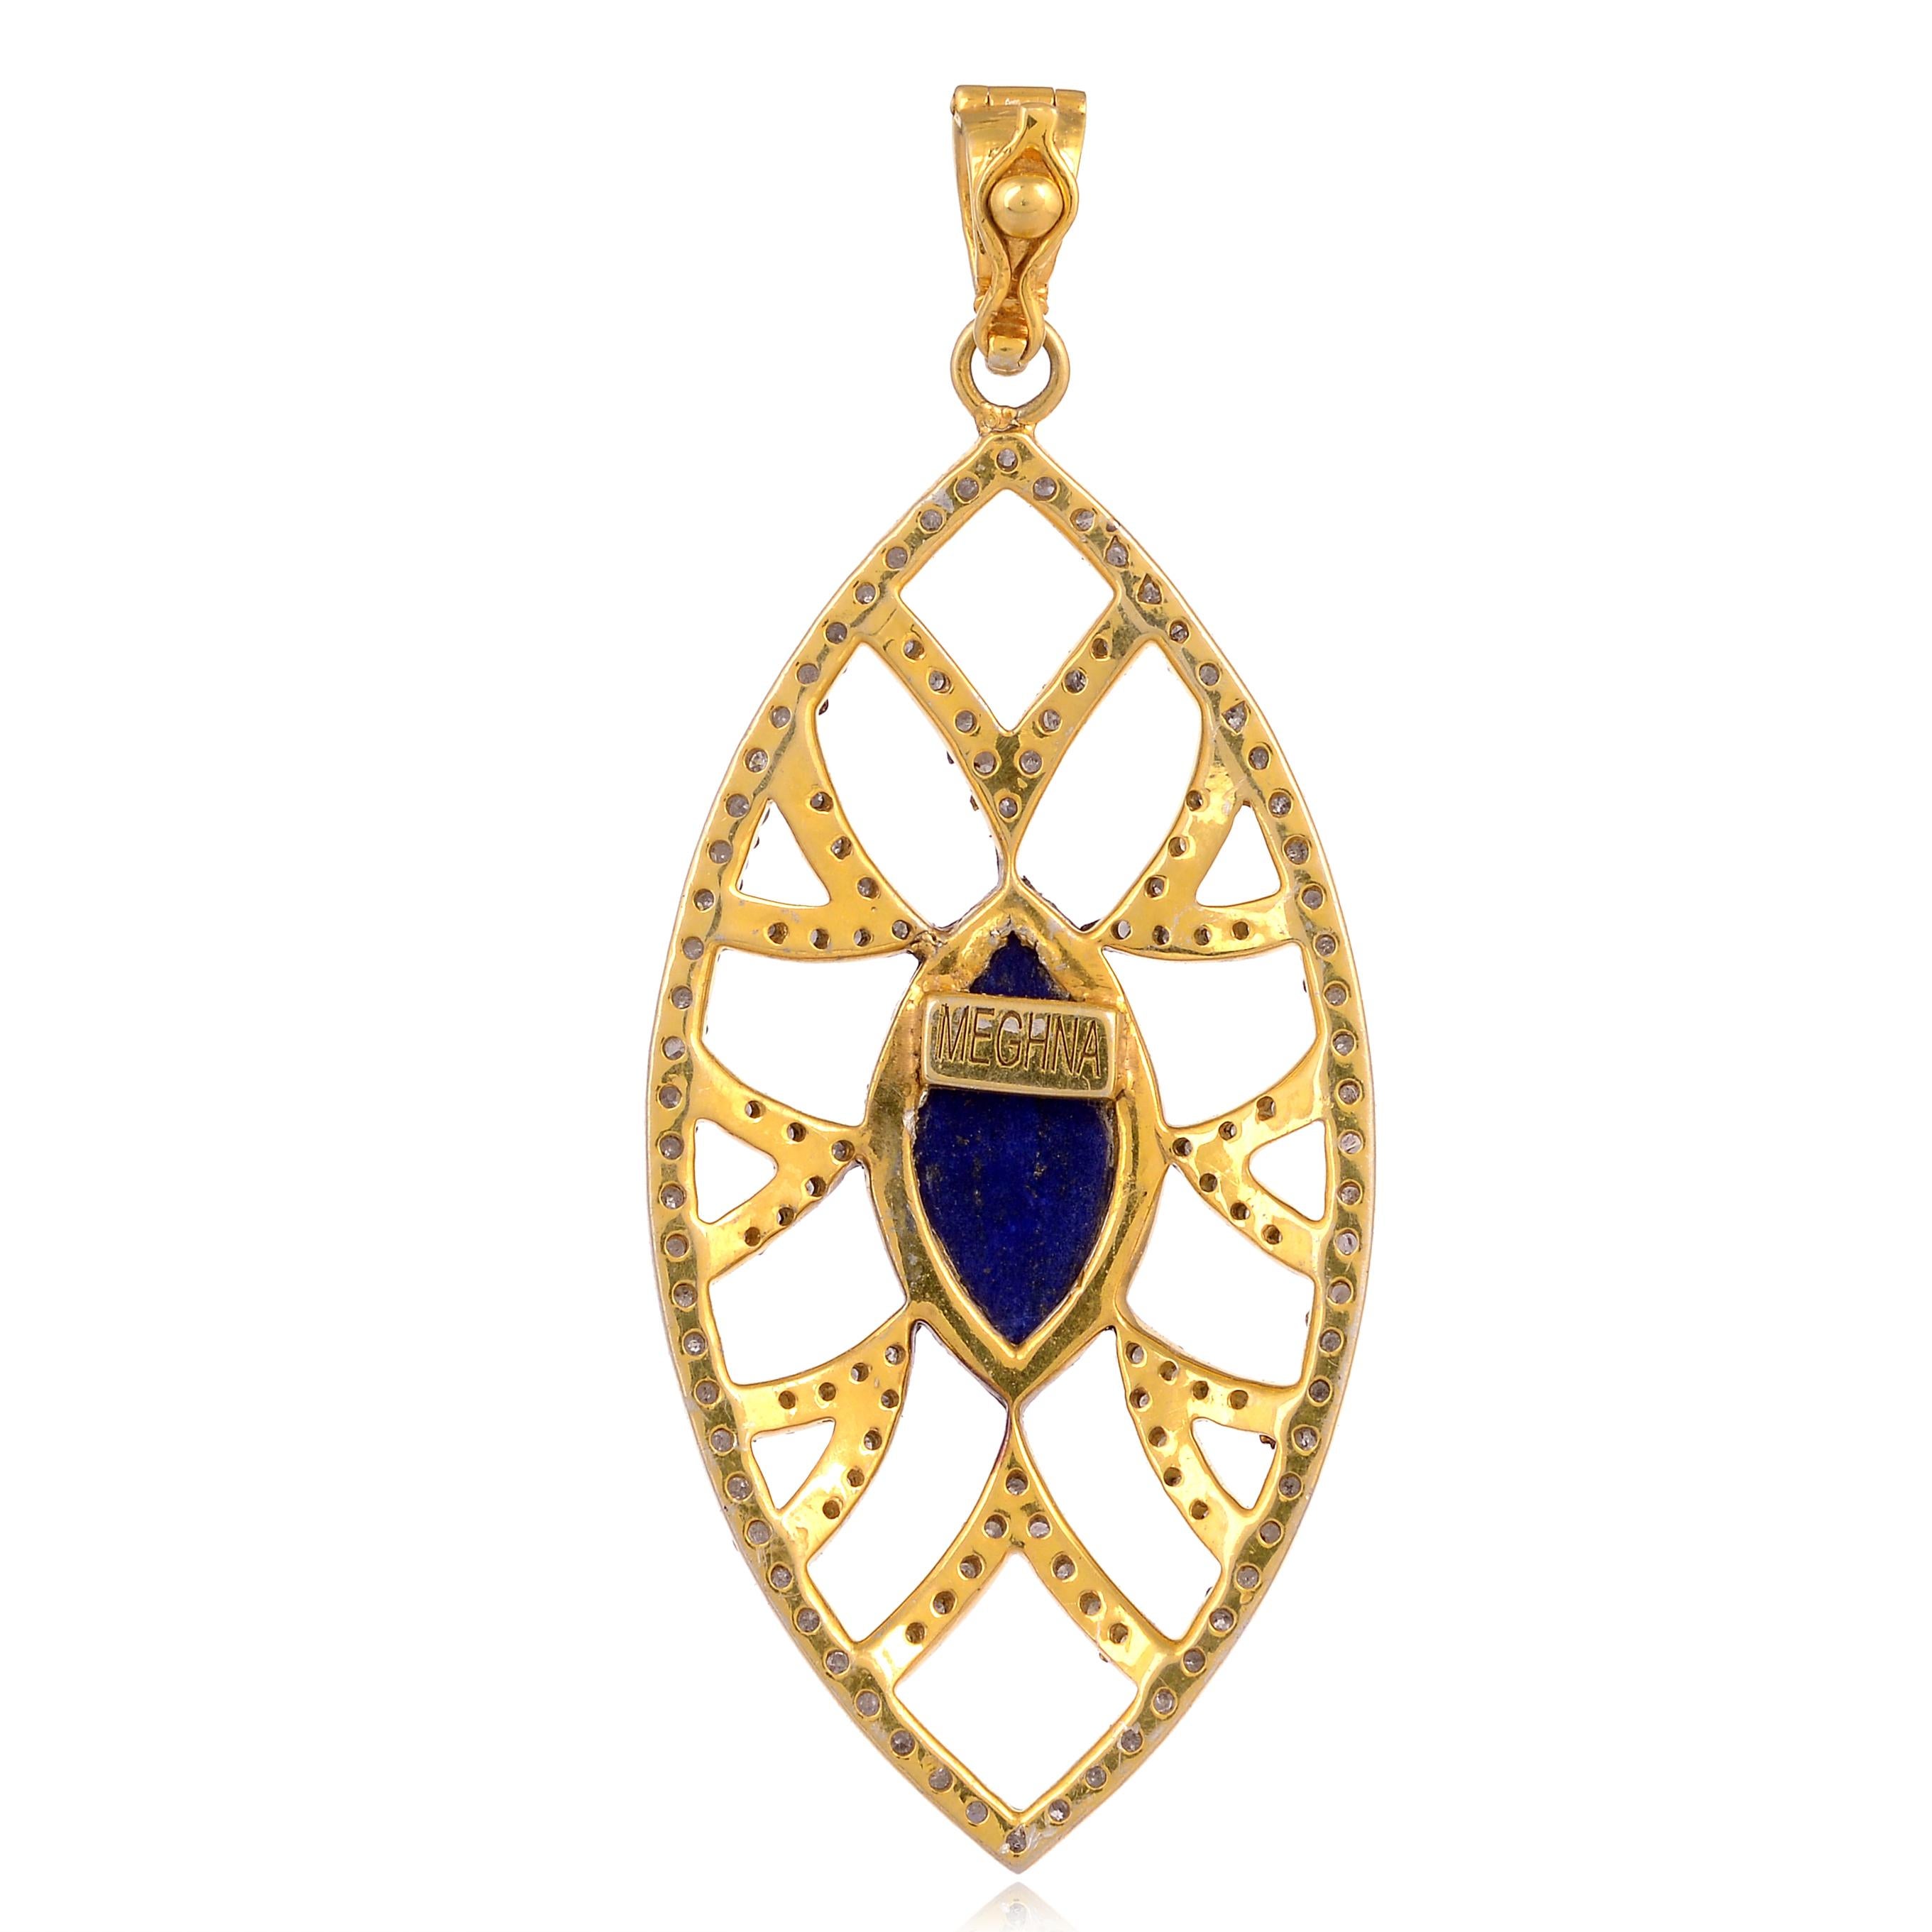 Cast in 18K gold and sterling silver. The Bora Bora pendant is stunningly set in 2.45 carat marquise lapis and diamonds. 

Bora Bora Collection is inspired by the beautiful French Polynesia in Bora Bora Island.  Each piece is centered with a single